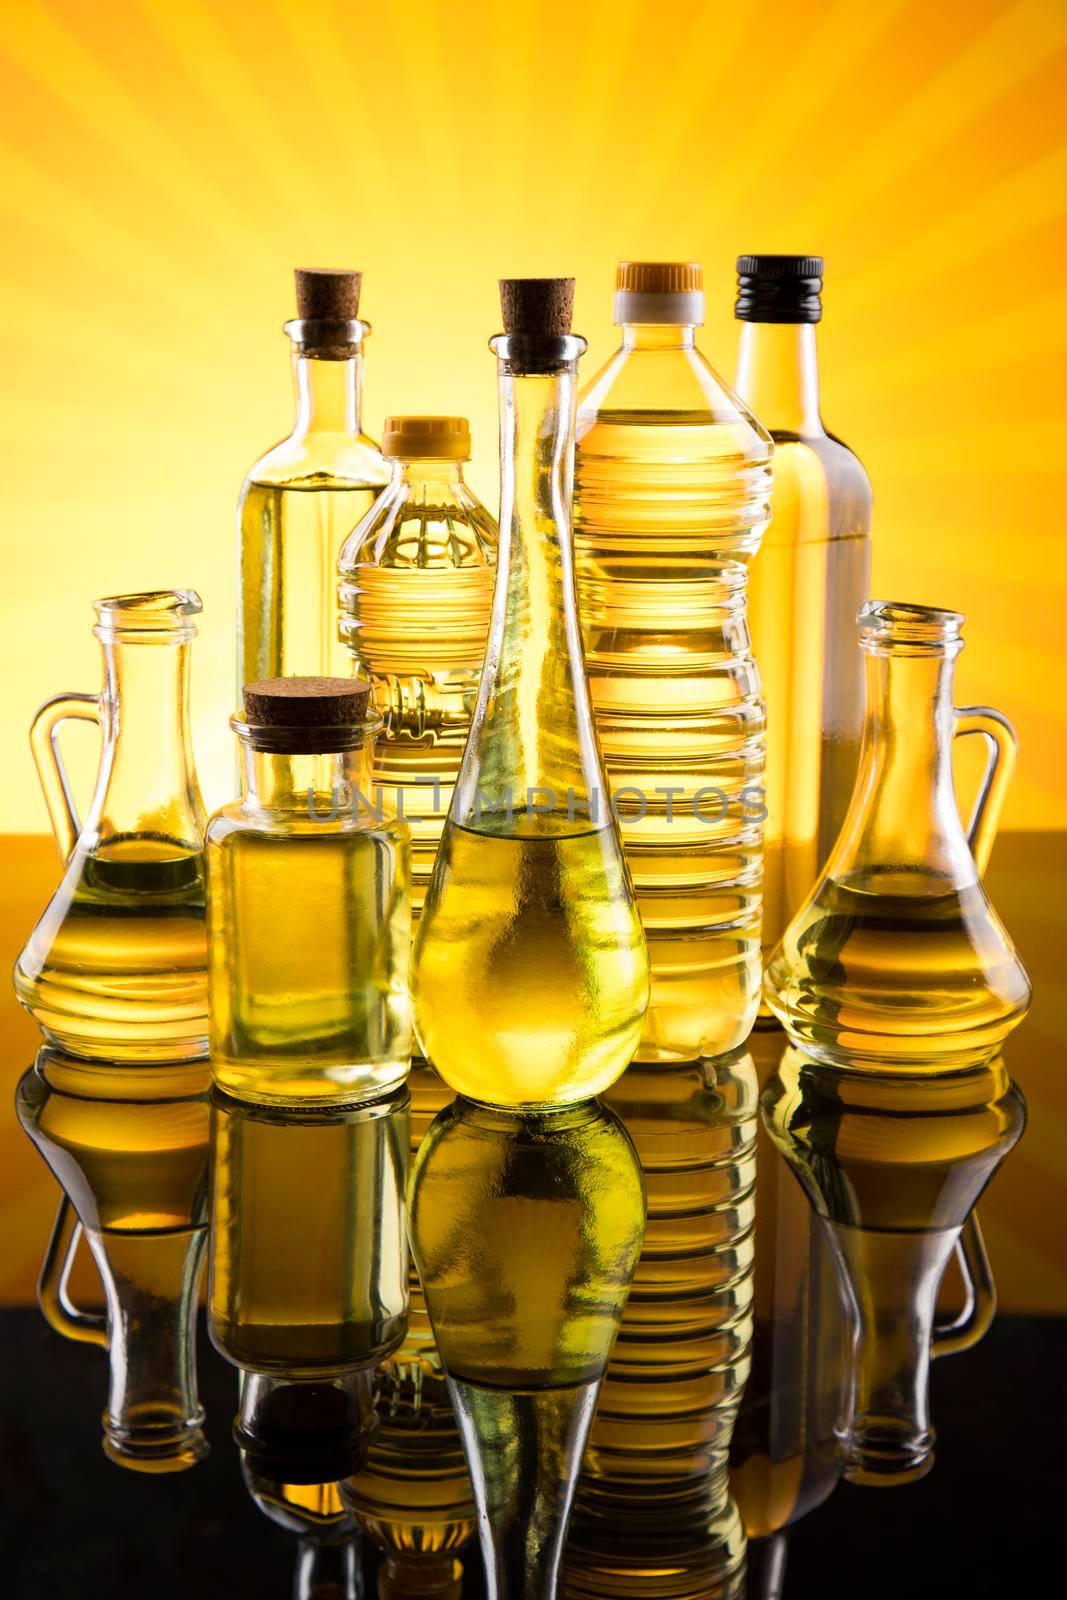 Bottles with organic cooking olive oil by JanPietruszka